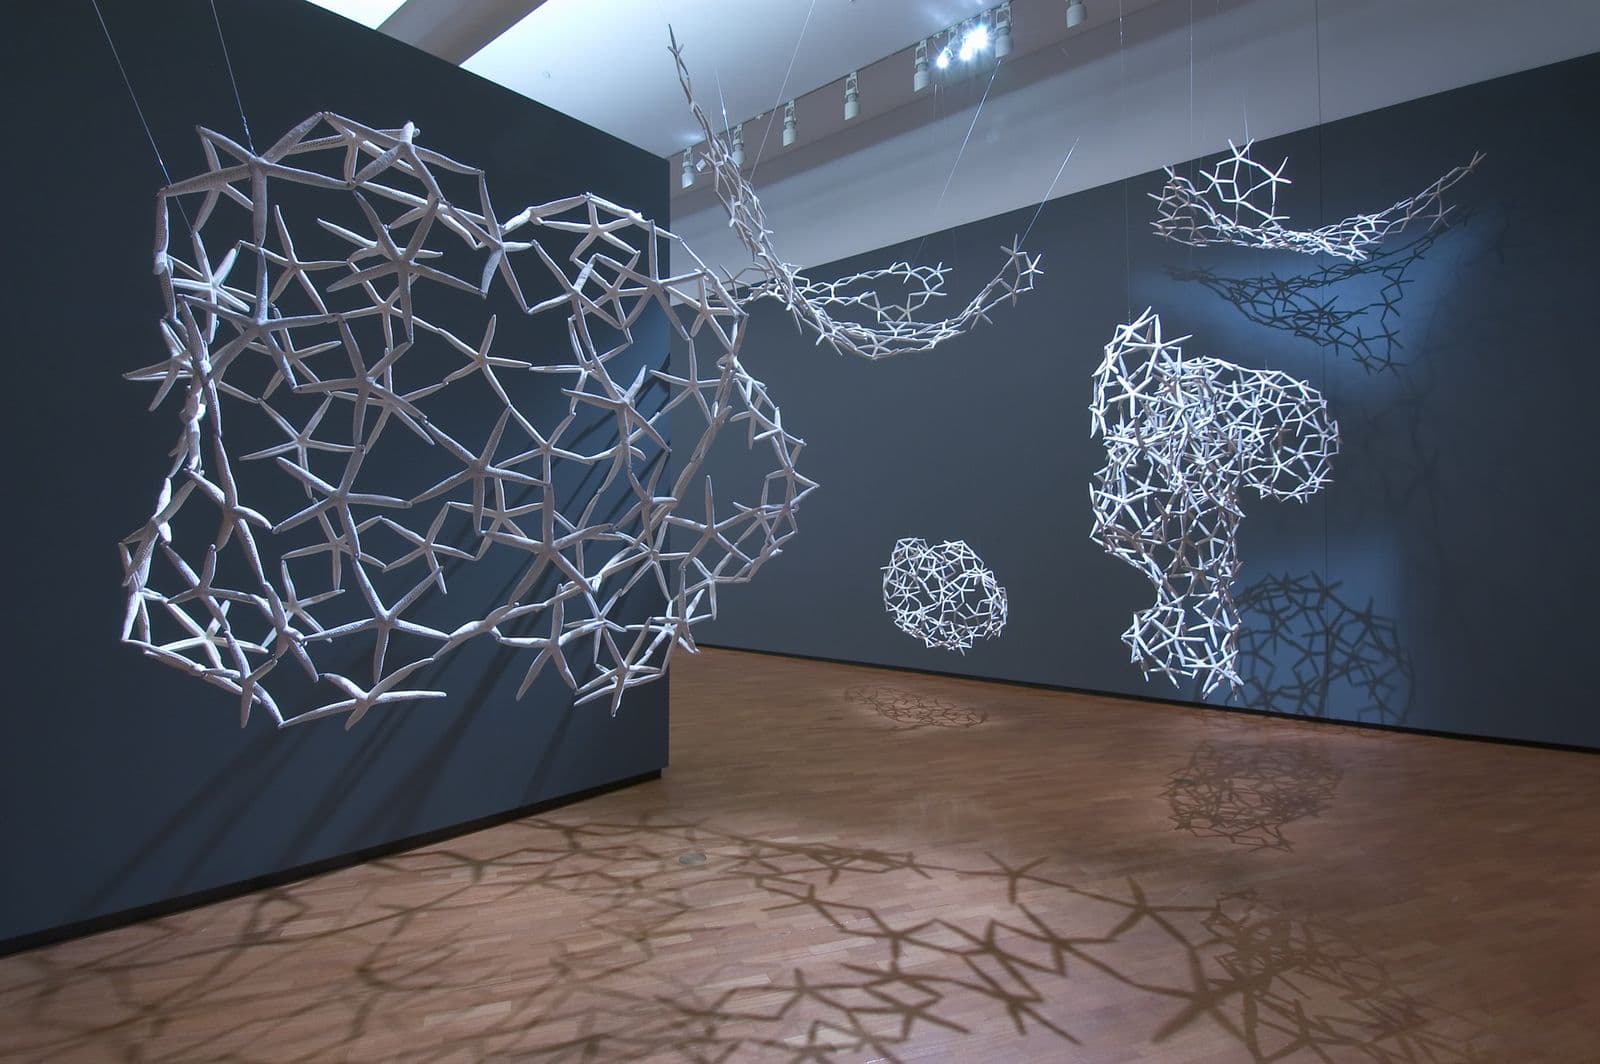 Five ceiling hung abstract sculptures formed of white starfish shaped pieces